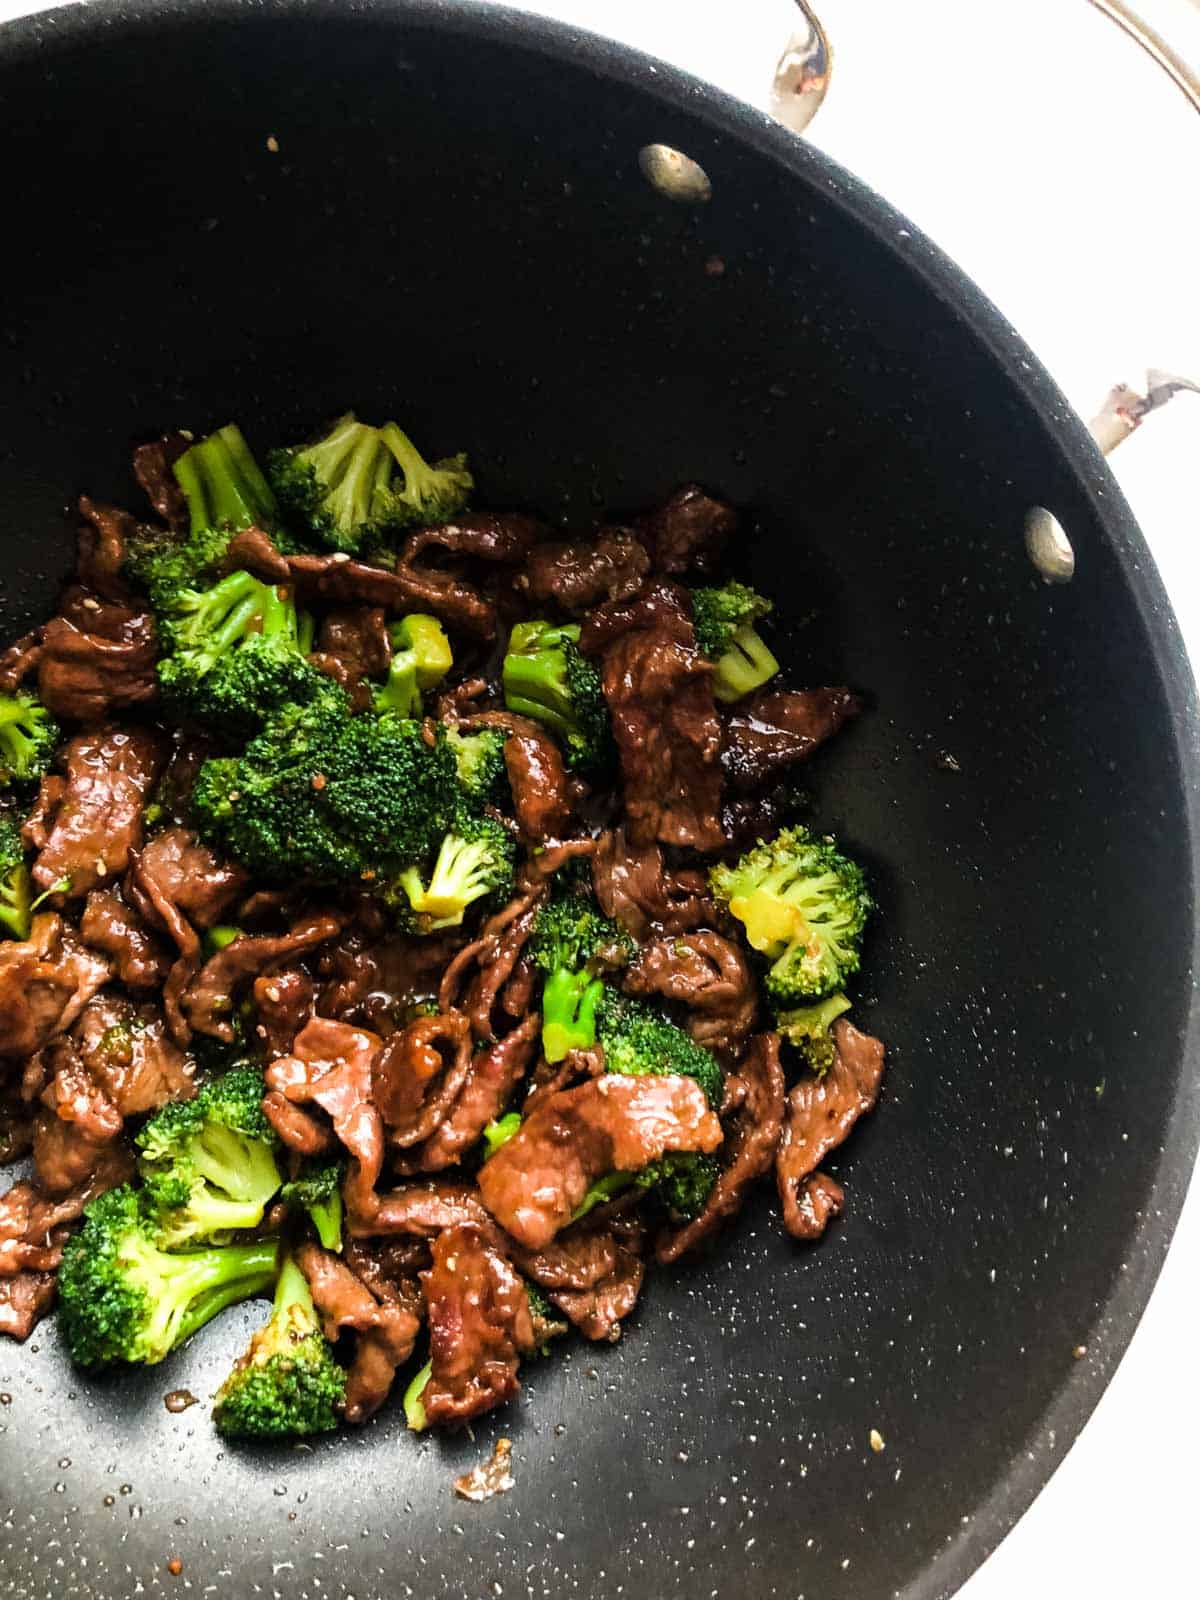 Strips of beef and broccoli cooked altogether smothered in teriyaki sauce in a nonstick pan.